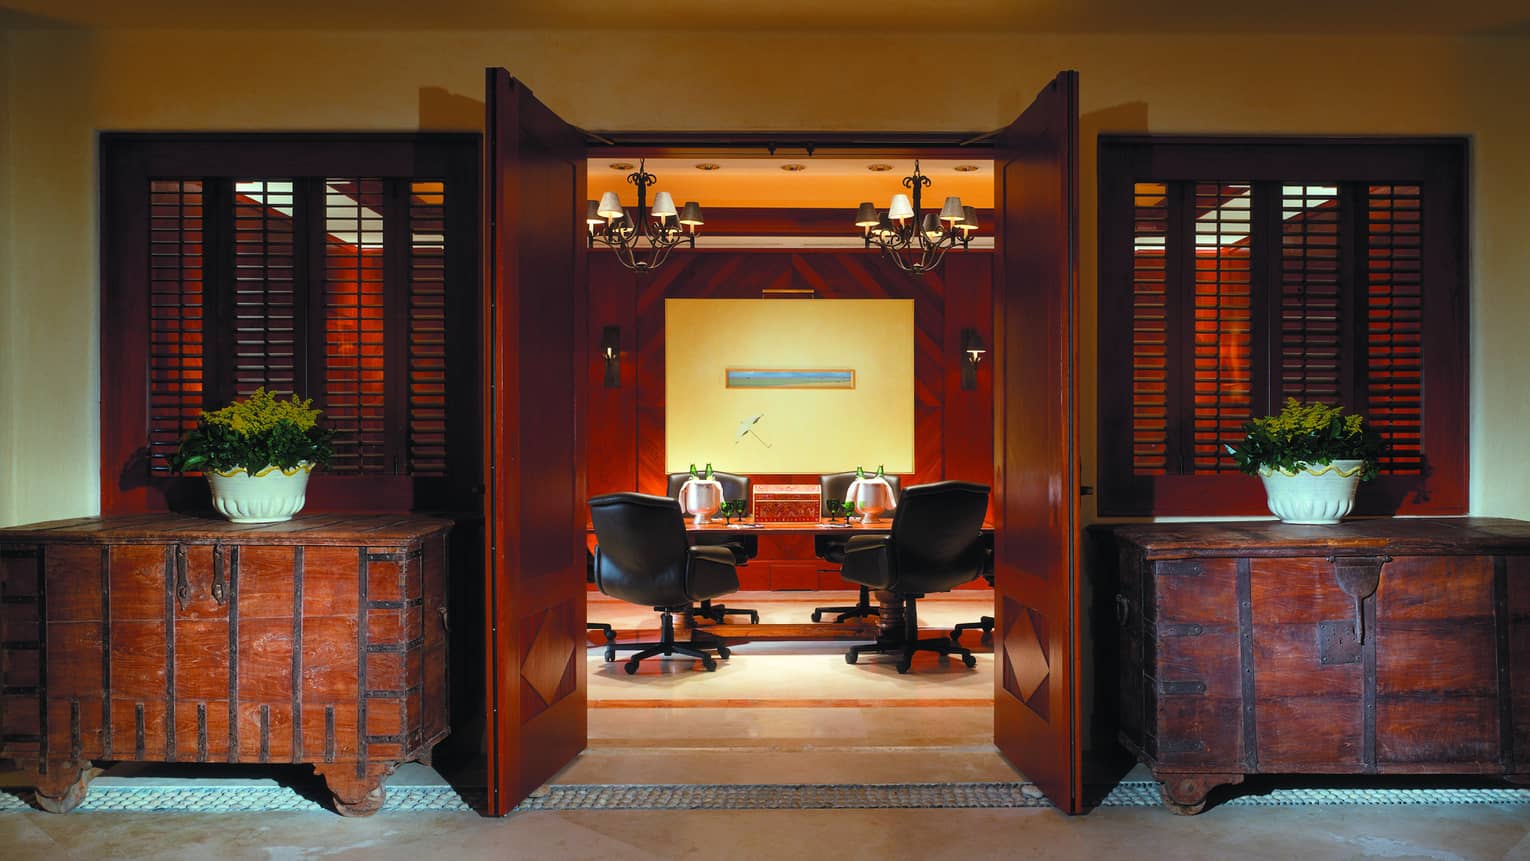 Rustic trunk cabinets flank open doors to Tau meeting room, table